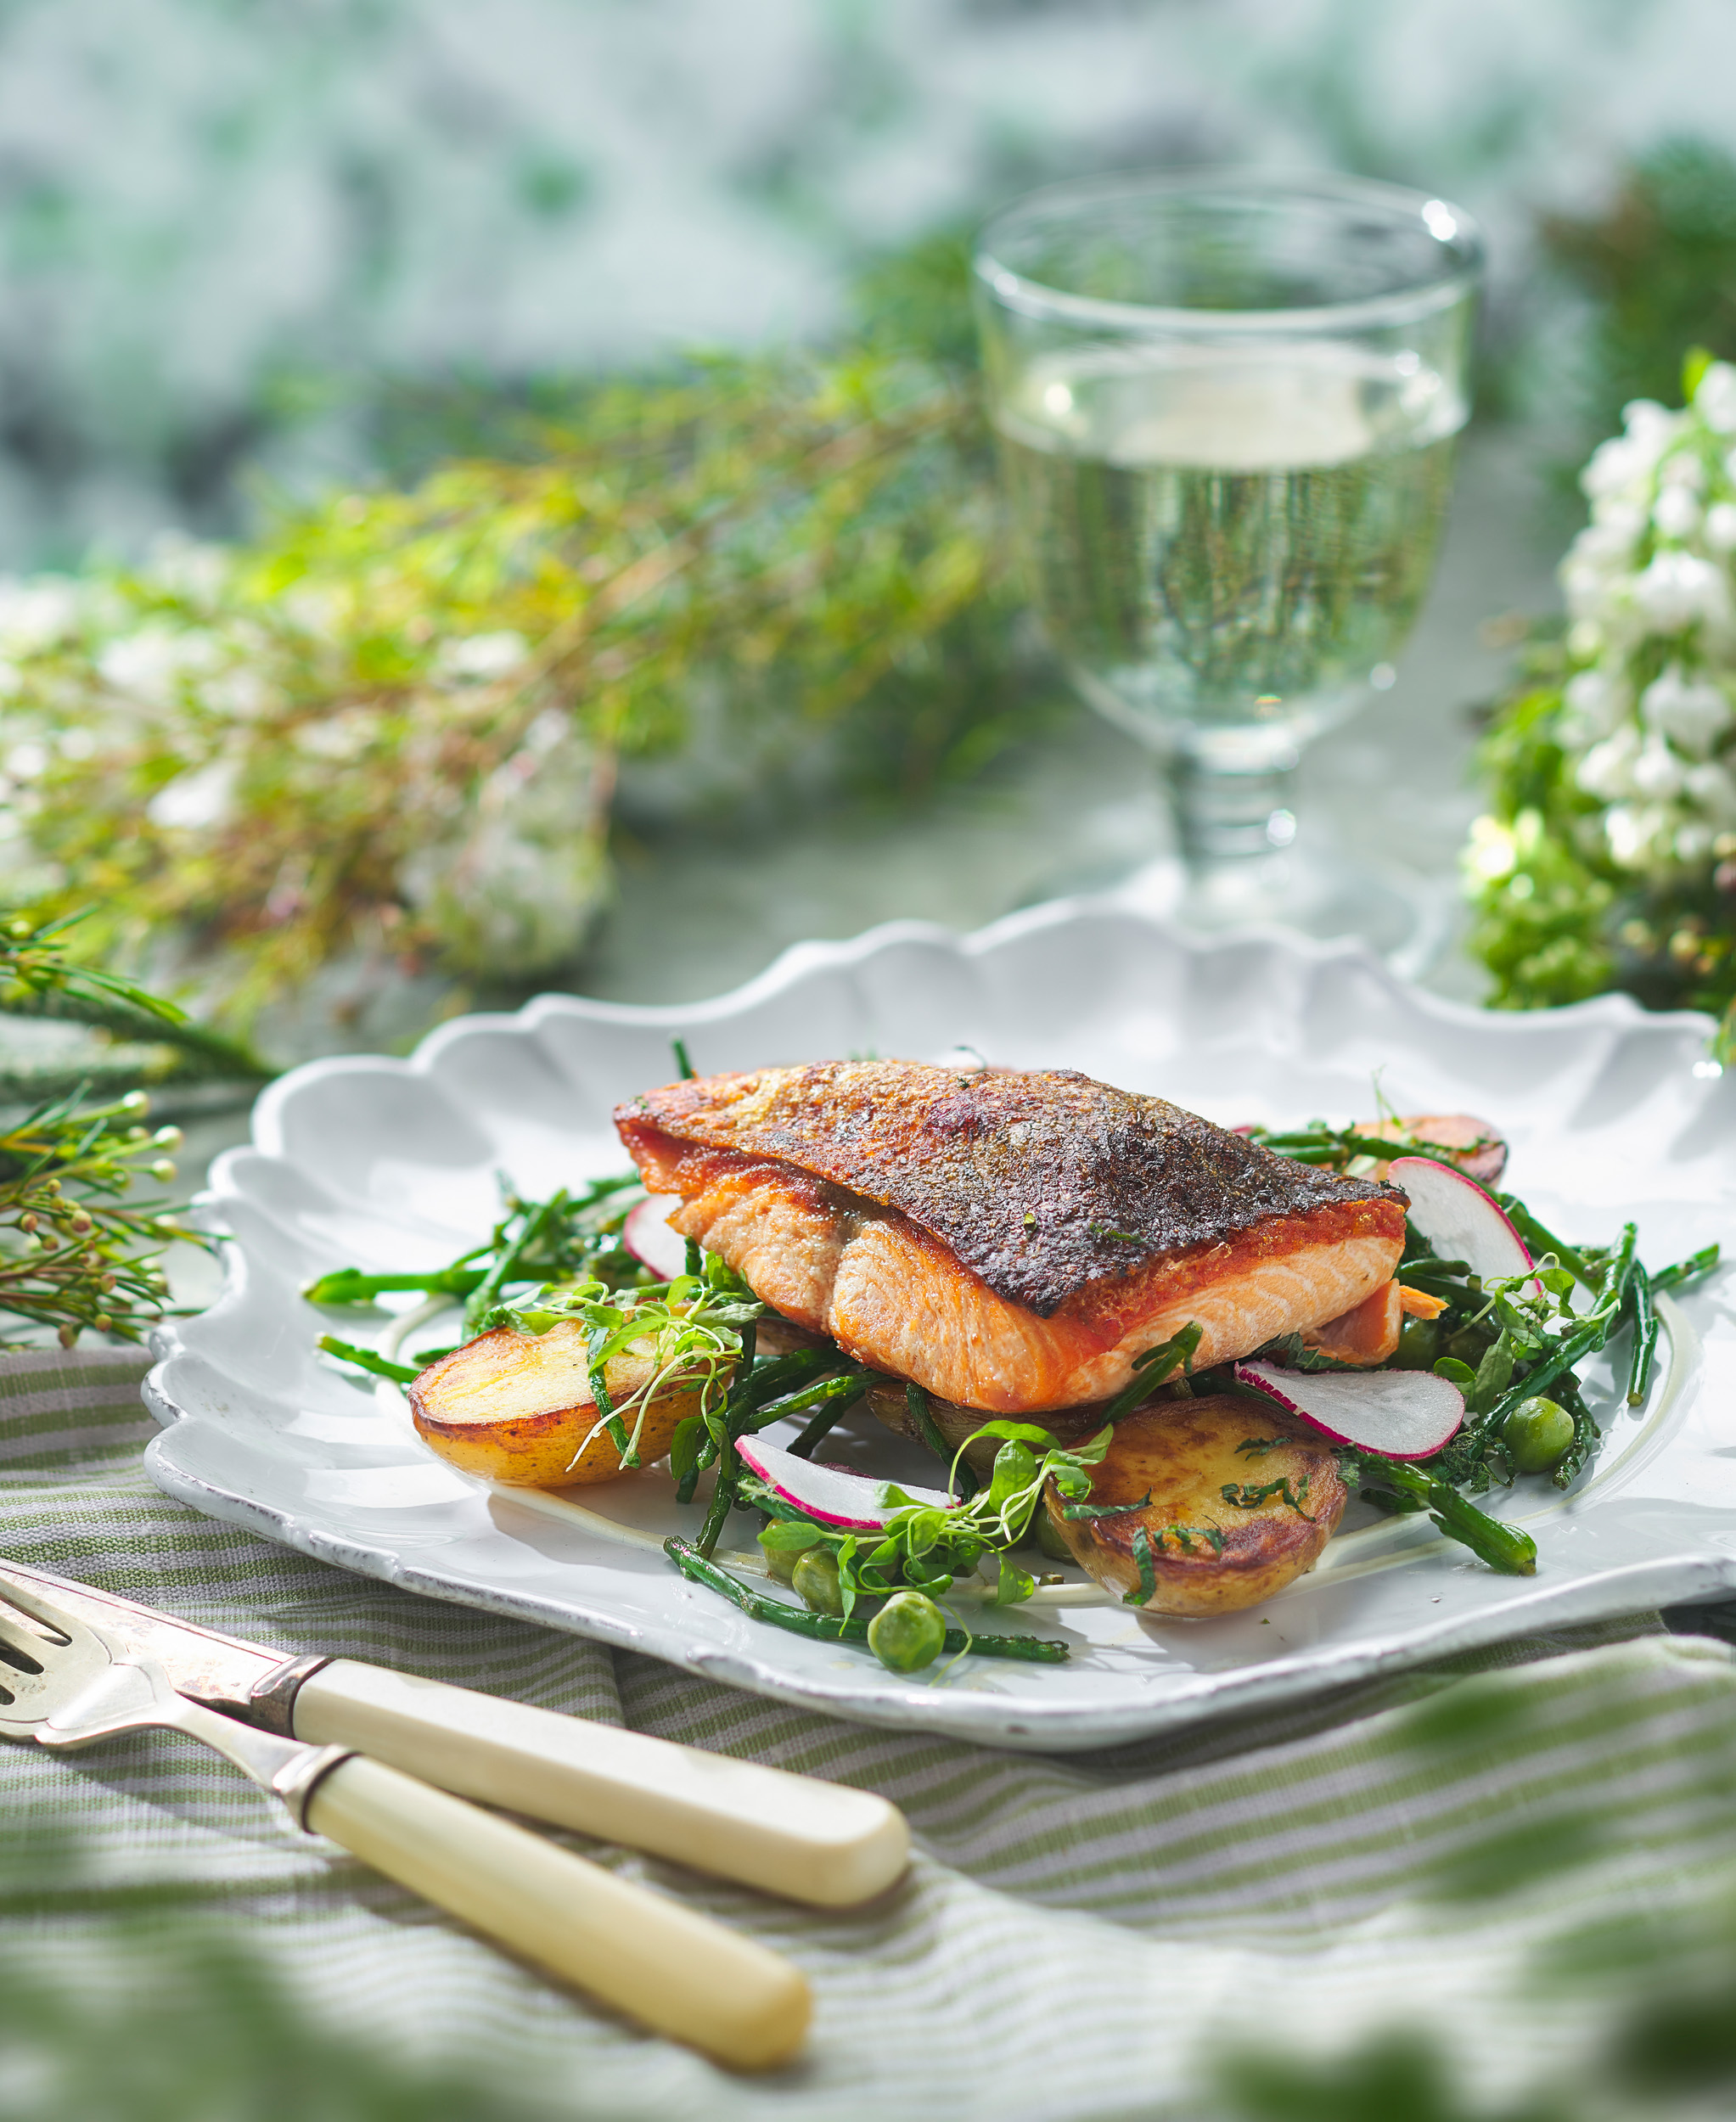 https://www.drakeandmorgan.co.uk/the-folly/wp-content/uploads/2022/05/Seafood-Trout-3.jpg